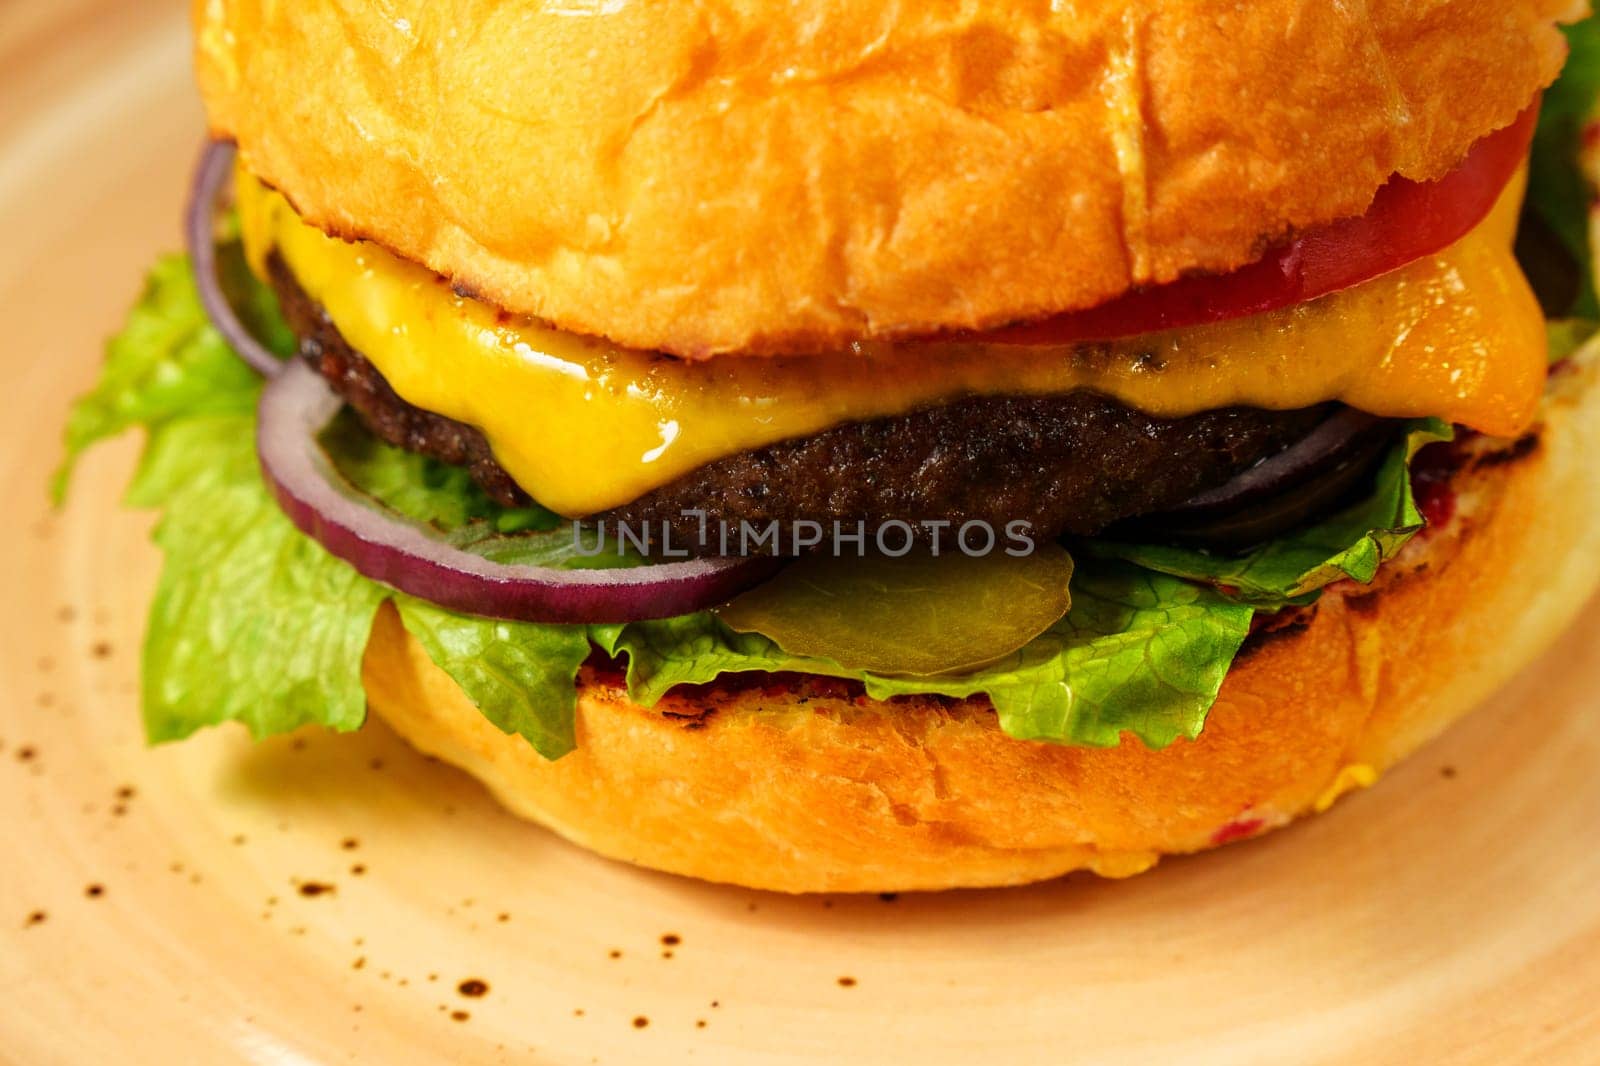 Cheeseburger topped with lettuce and various toppings placed on a plate, ready to be enjoyed.